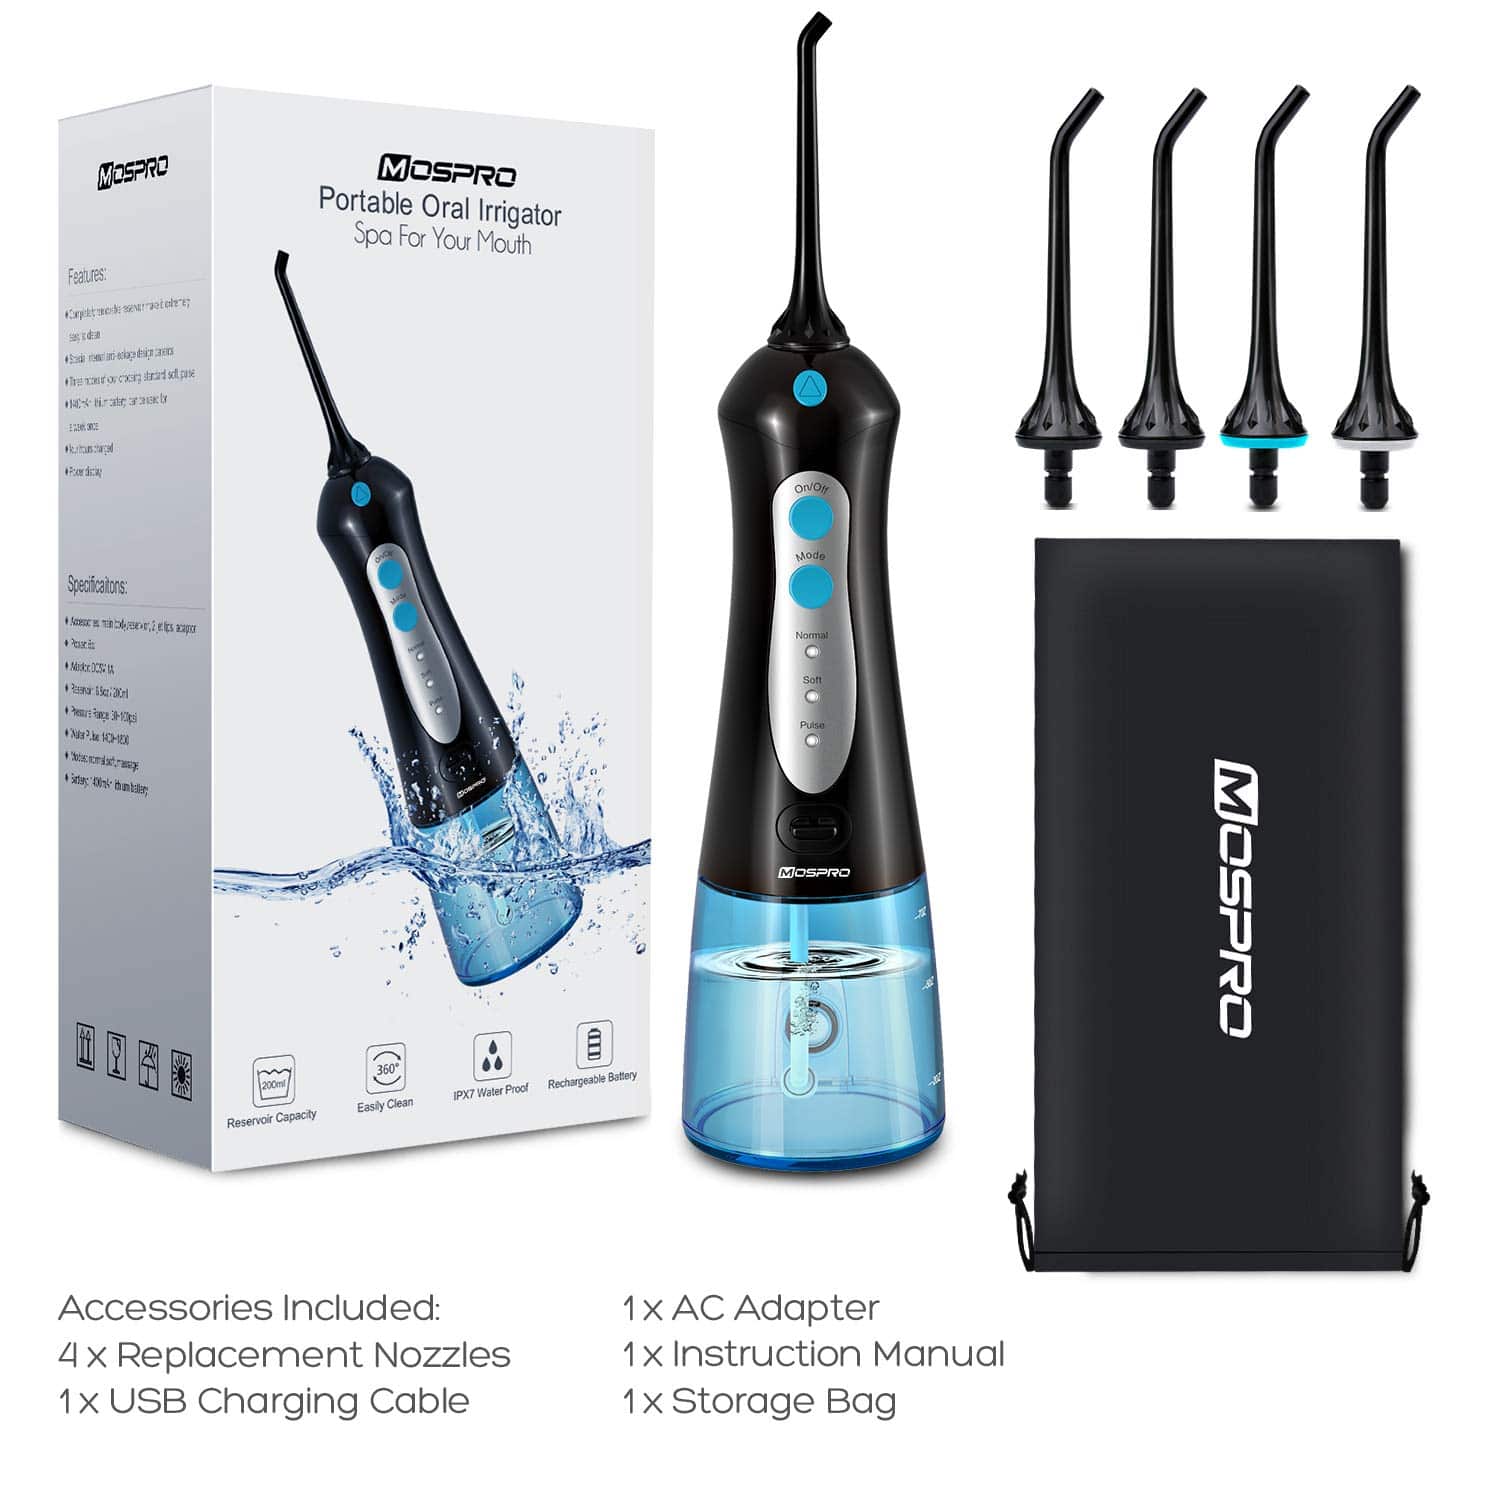 7 Best Cordless Water Flossers InDetail Reviews (May 2021)